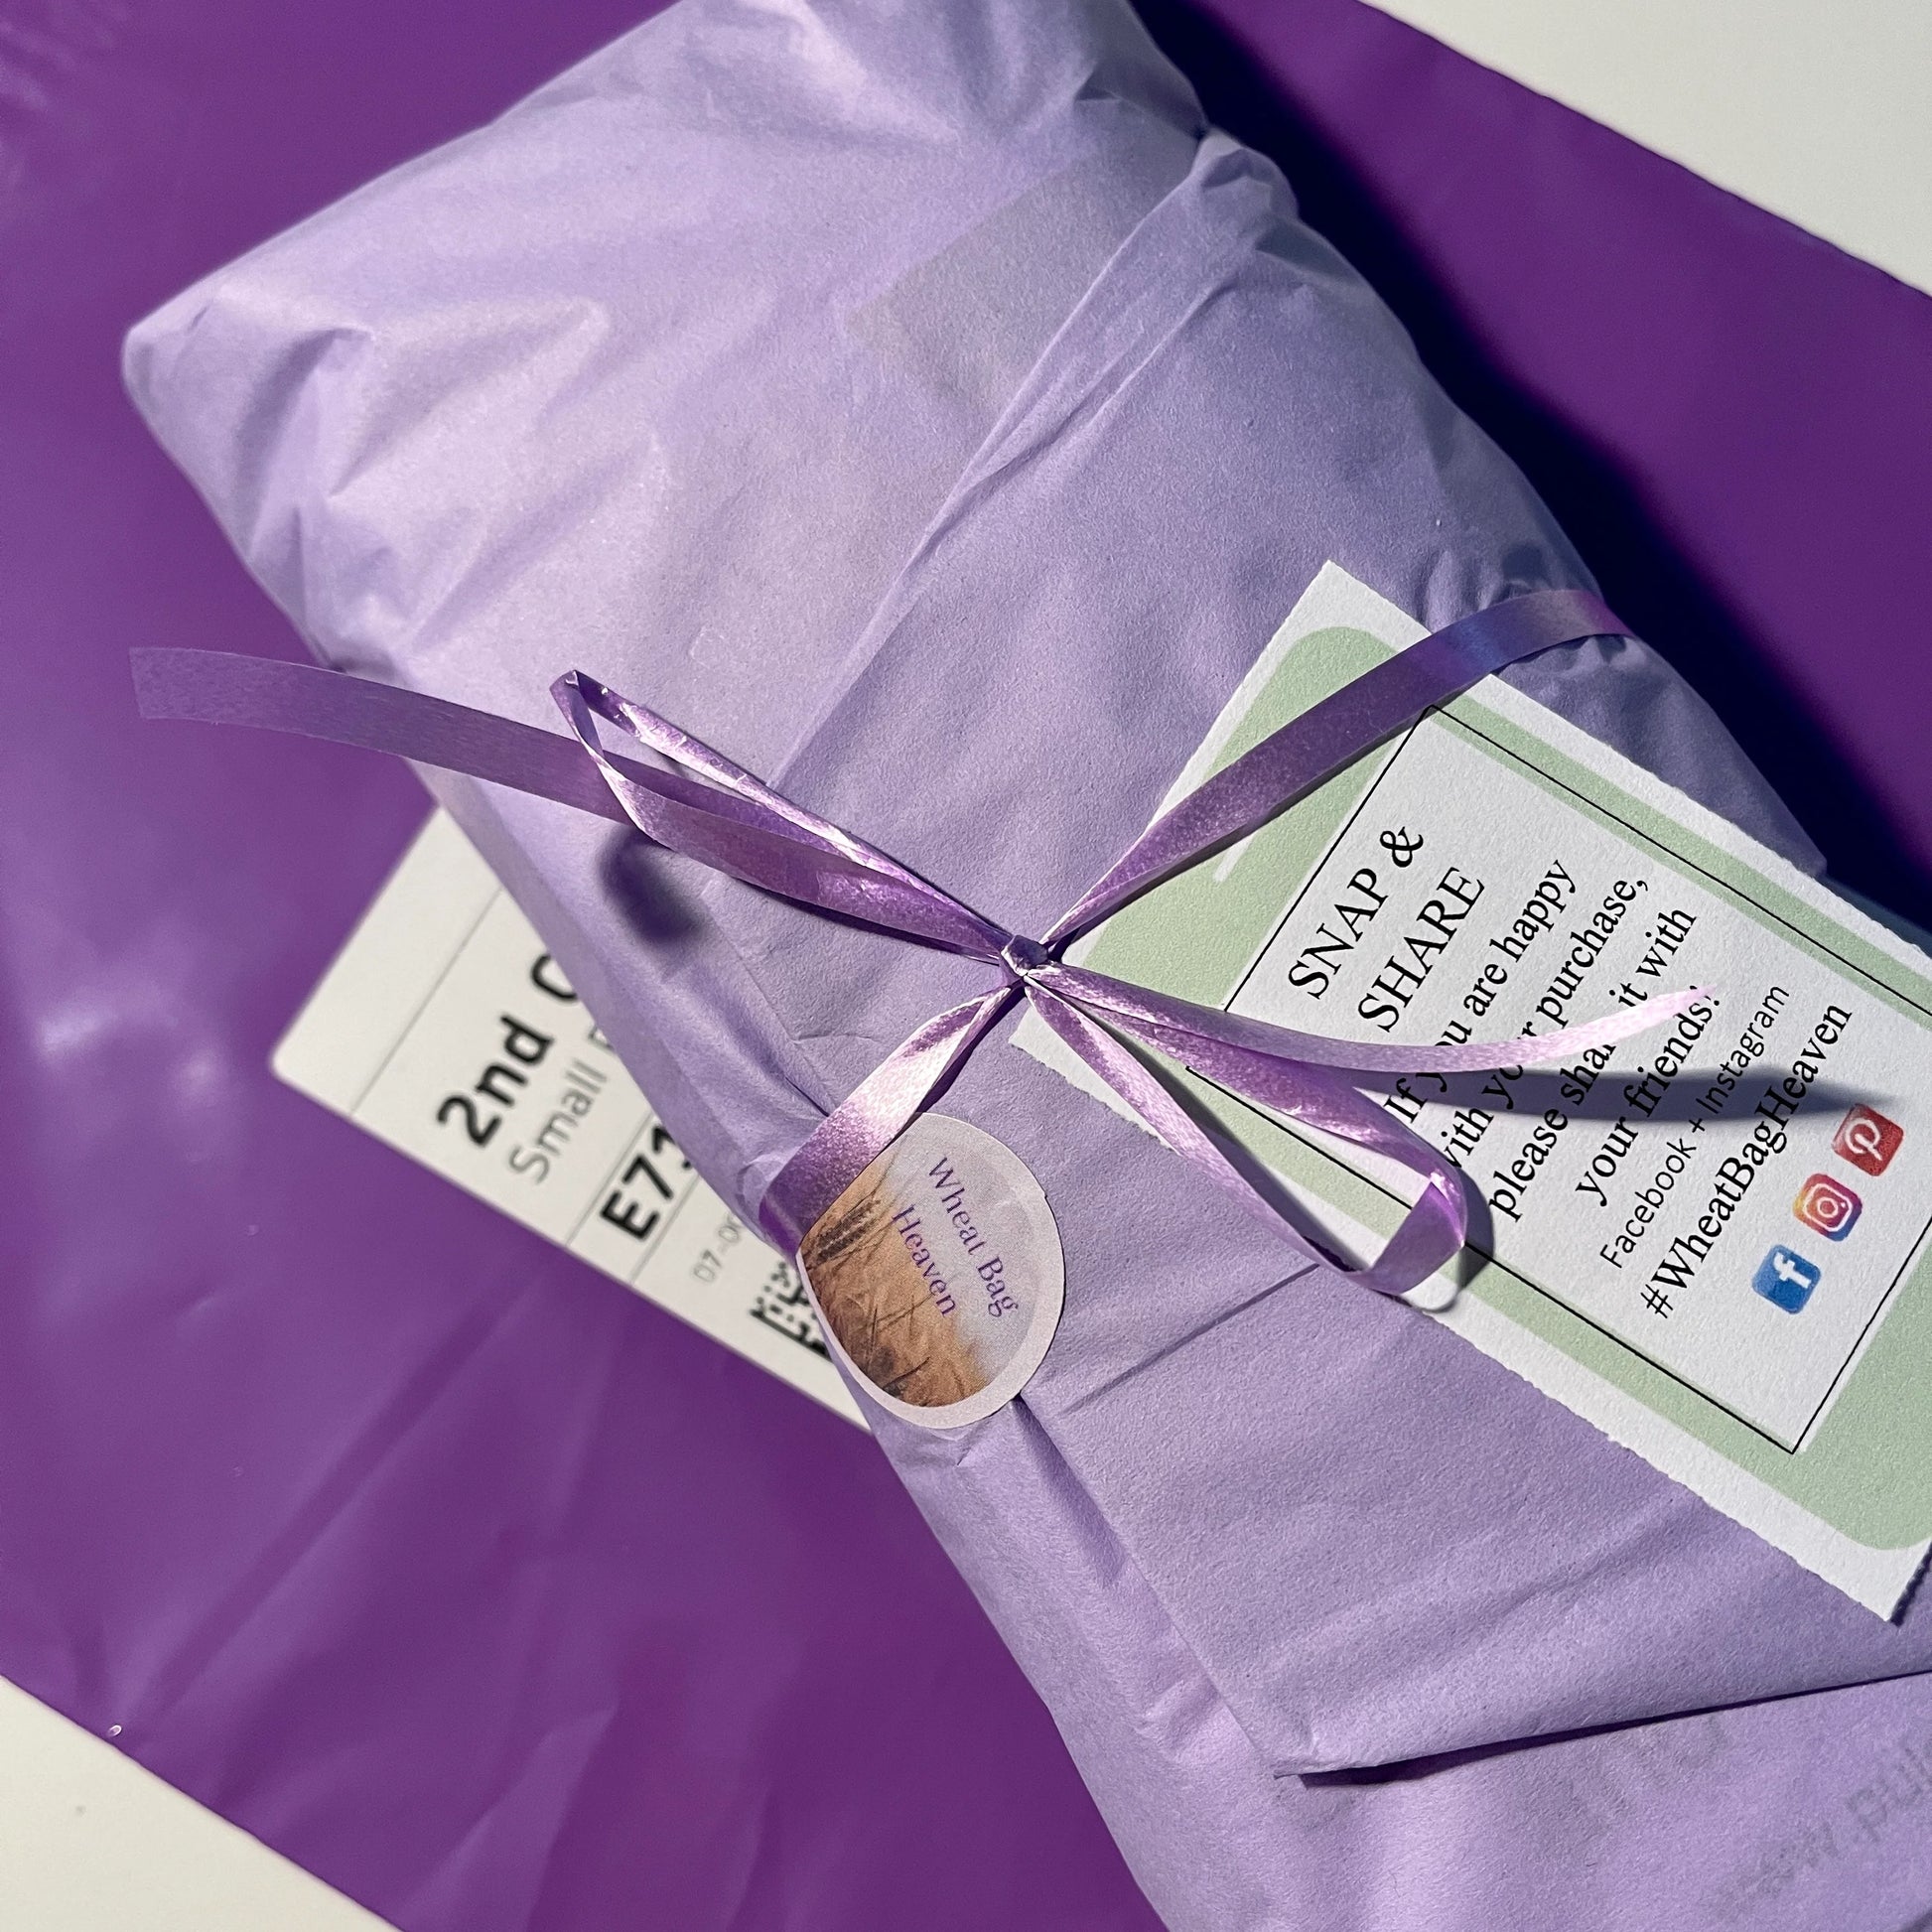 eye pillow wrapped in lilac tissue paper and tied with ribbon on a purple postal bag from WheatBagHeaven